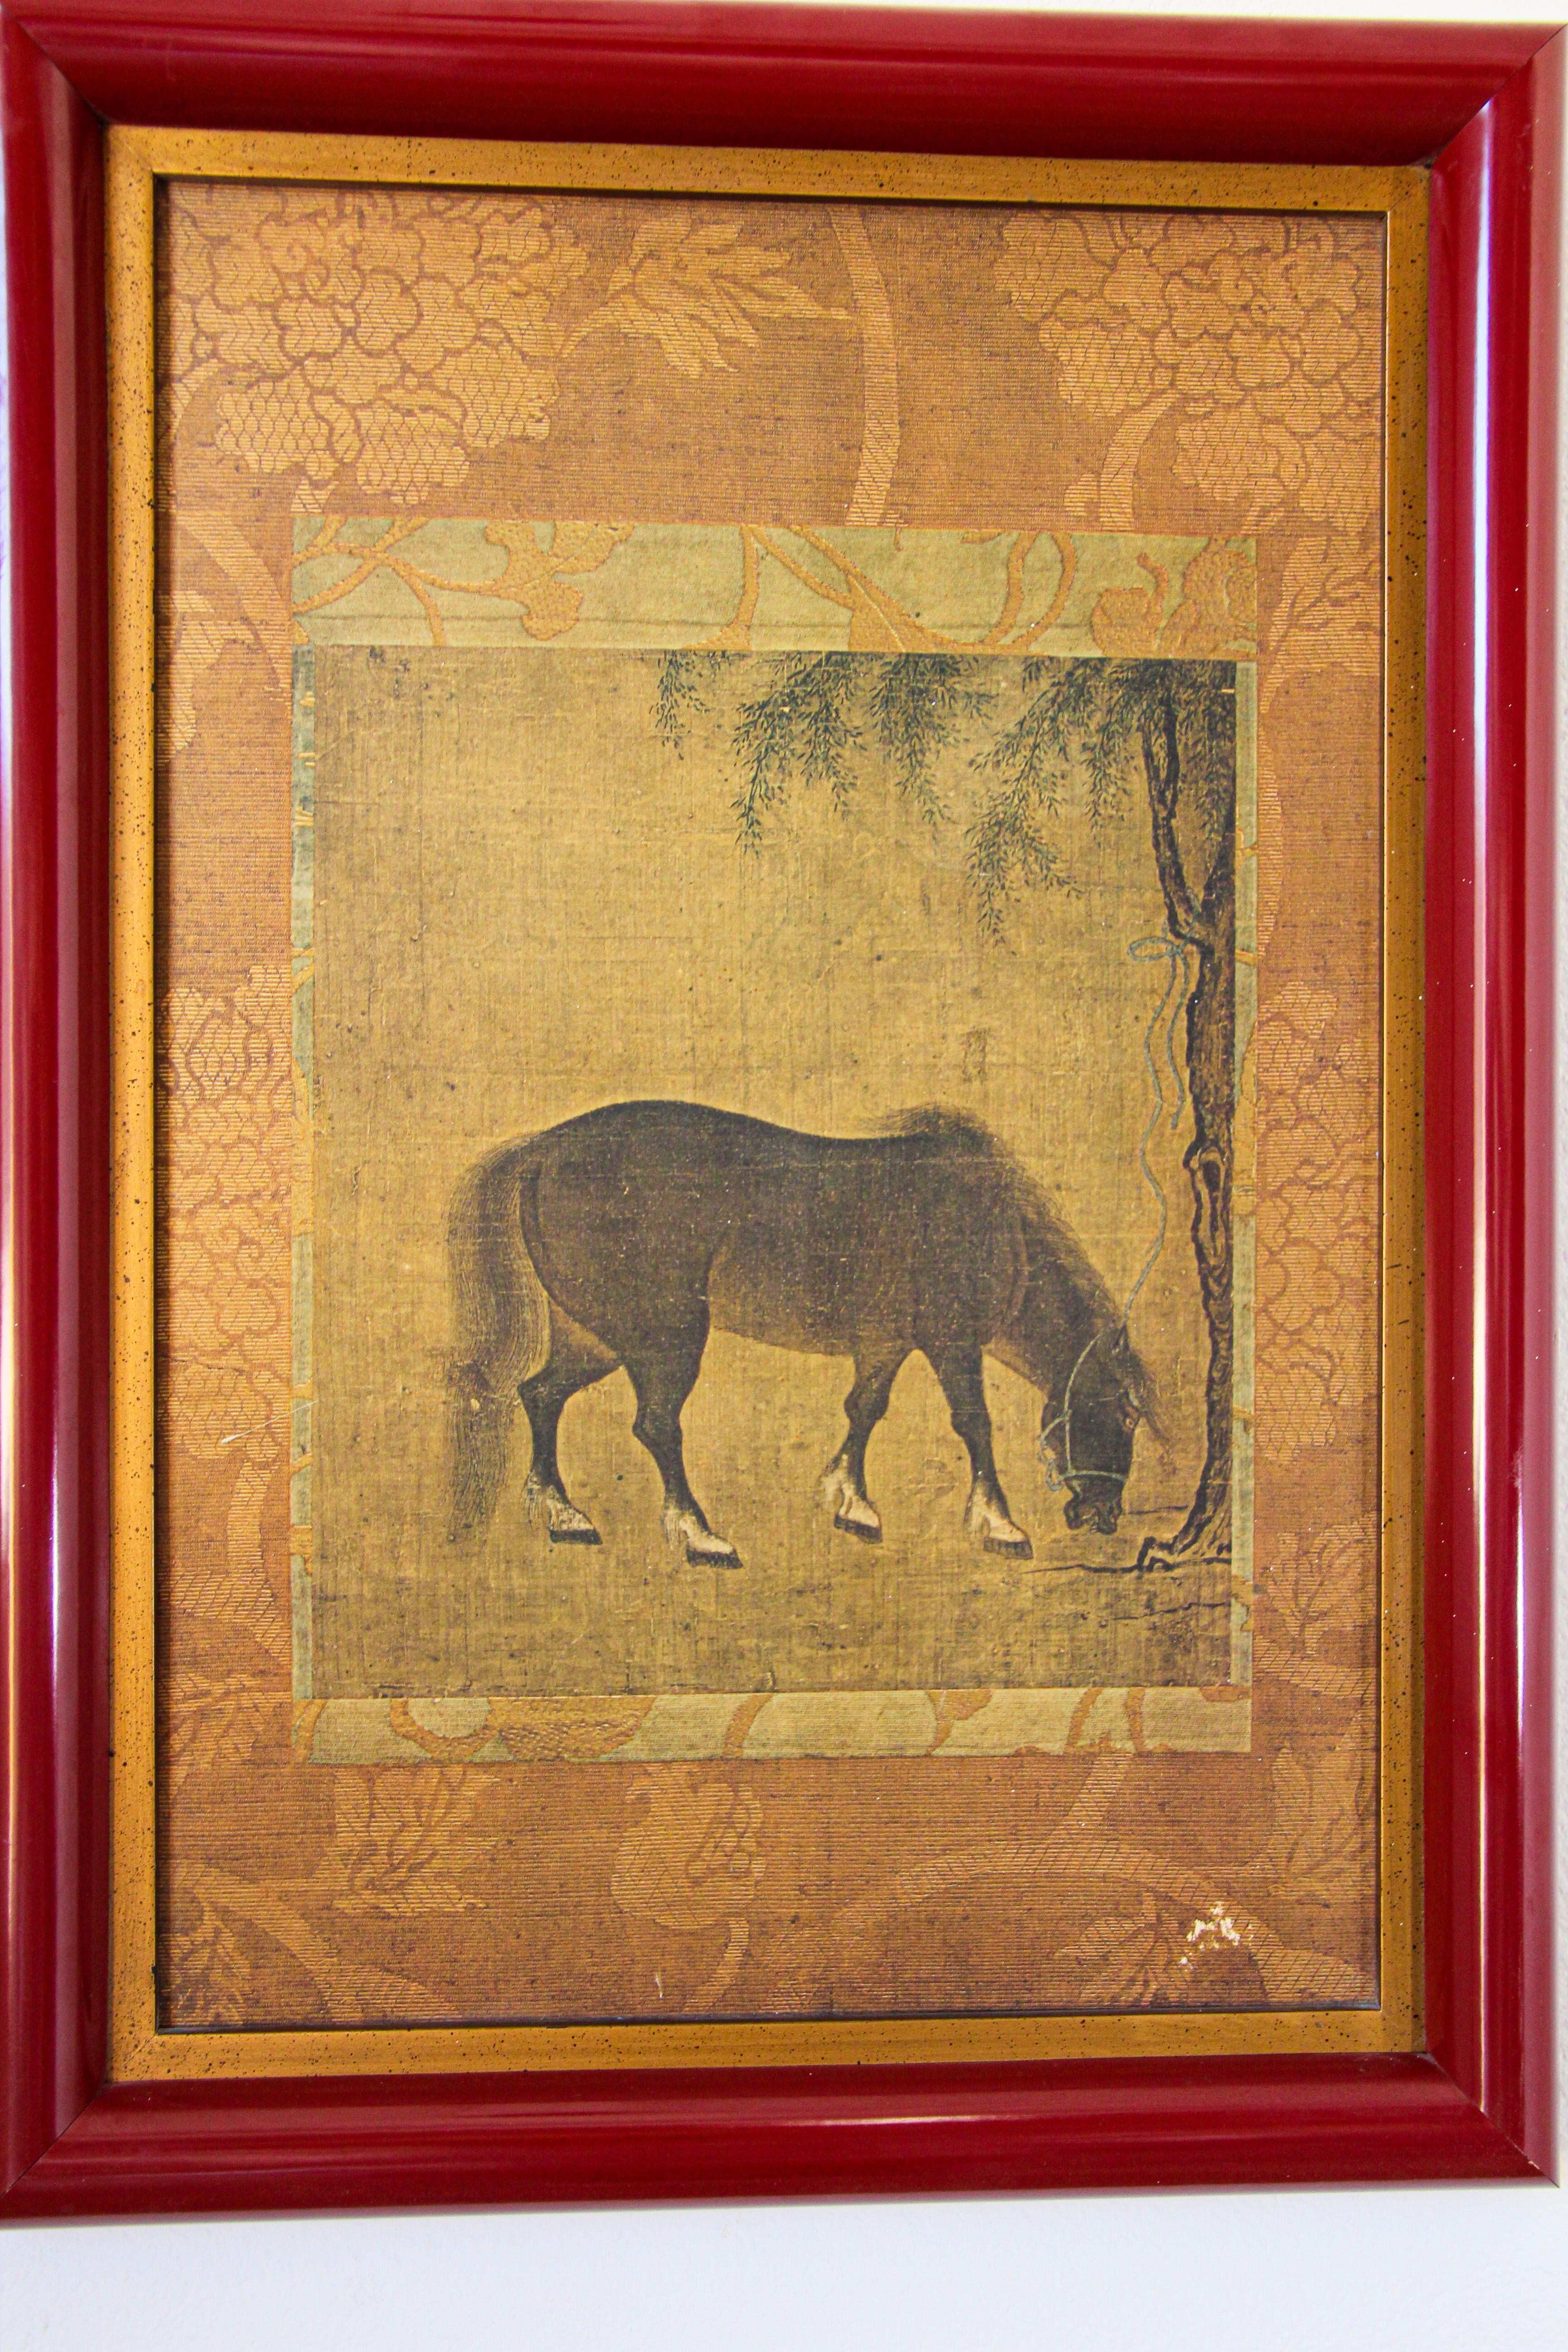 Asian Chinese horse print in a red wood frame.
Chinese lithograph print study of a horse.
Well framed, no glass.
Size: 21